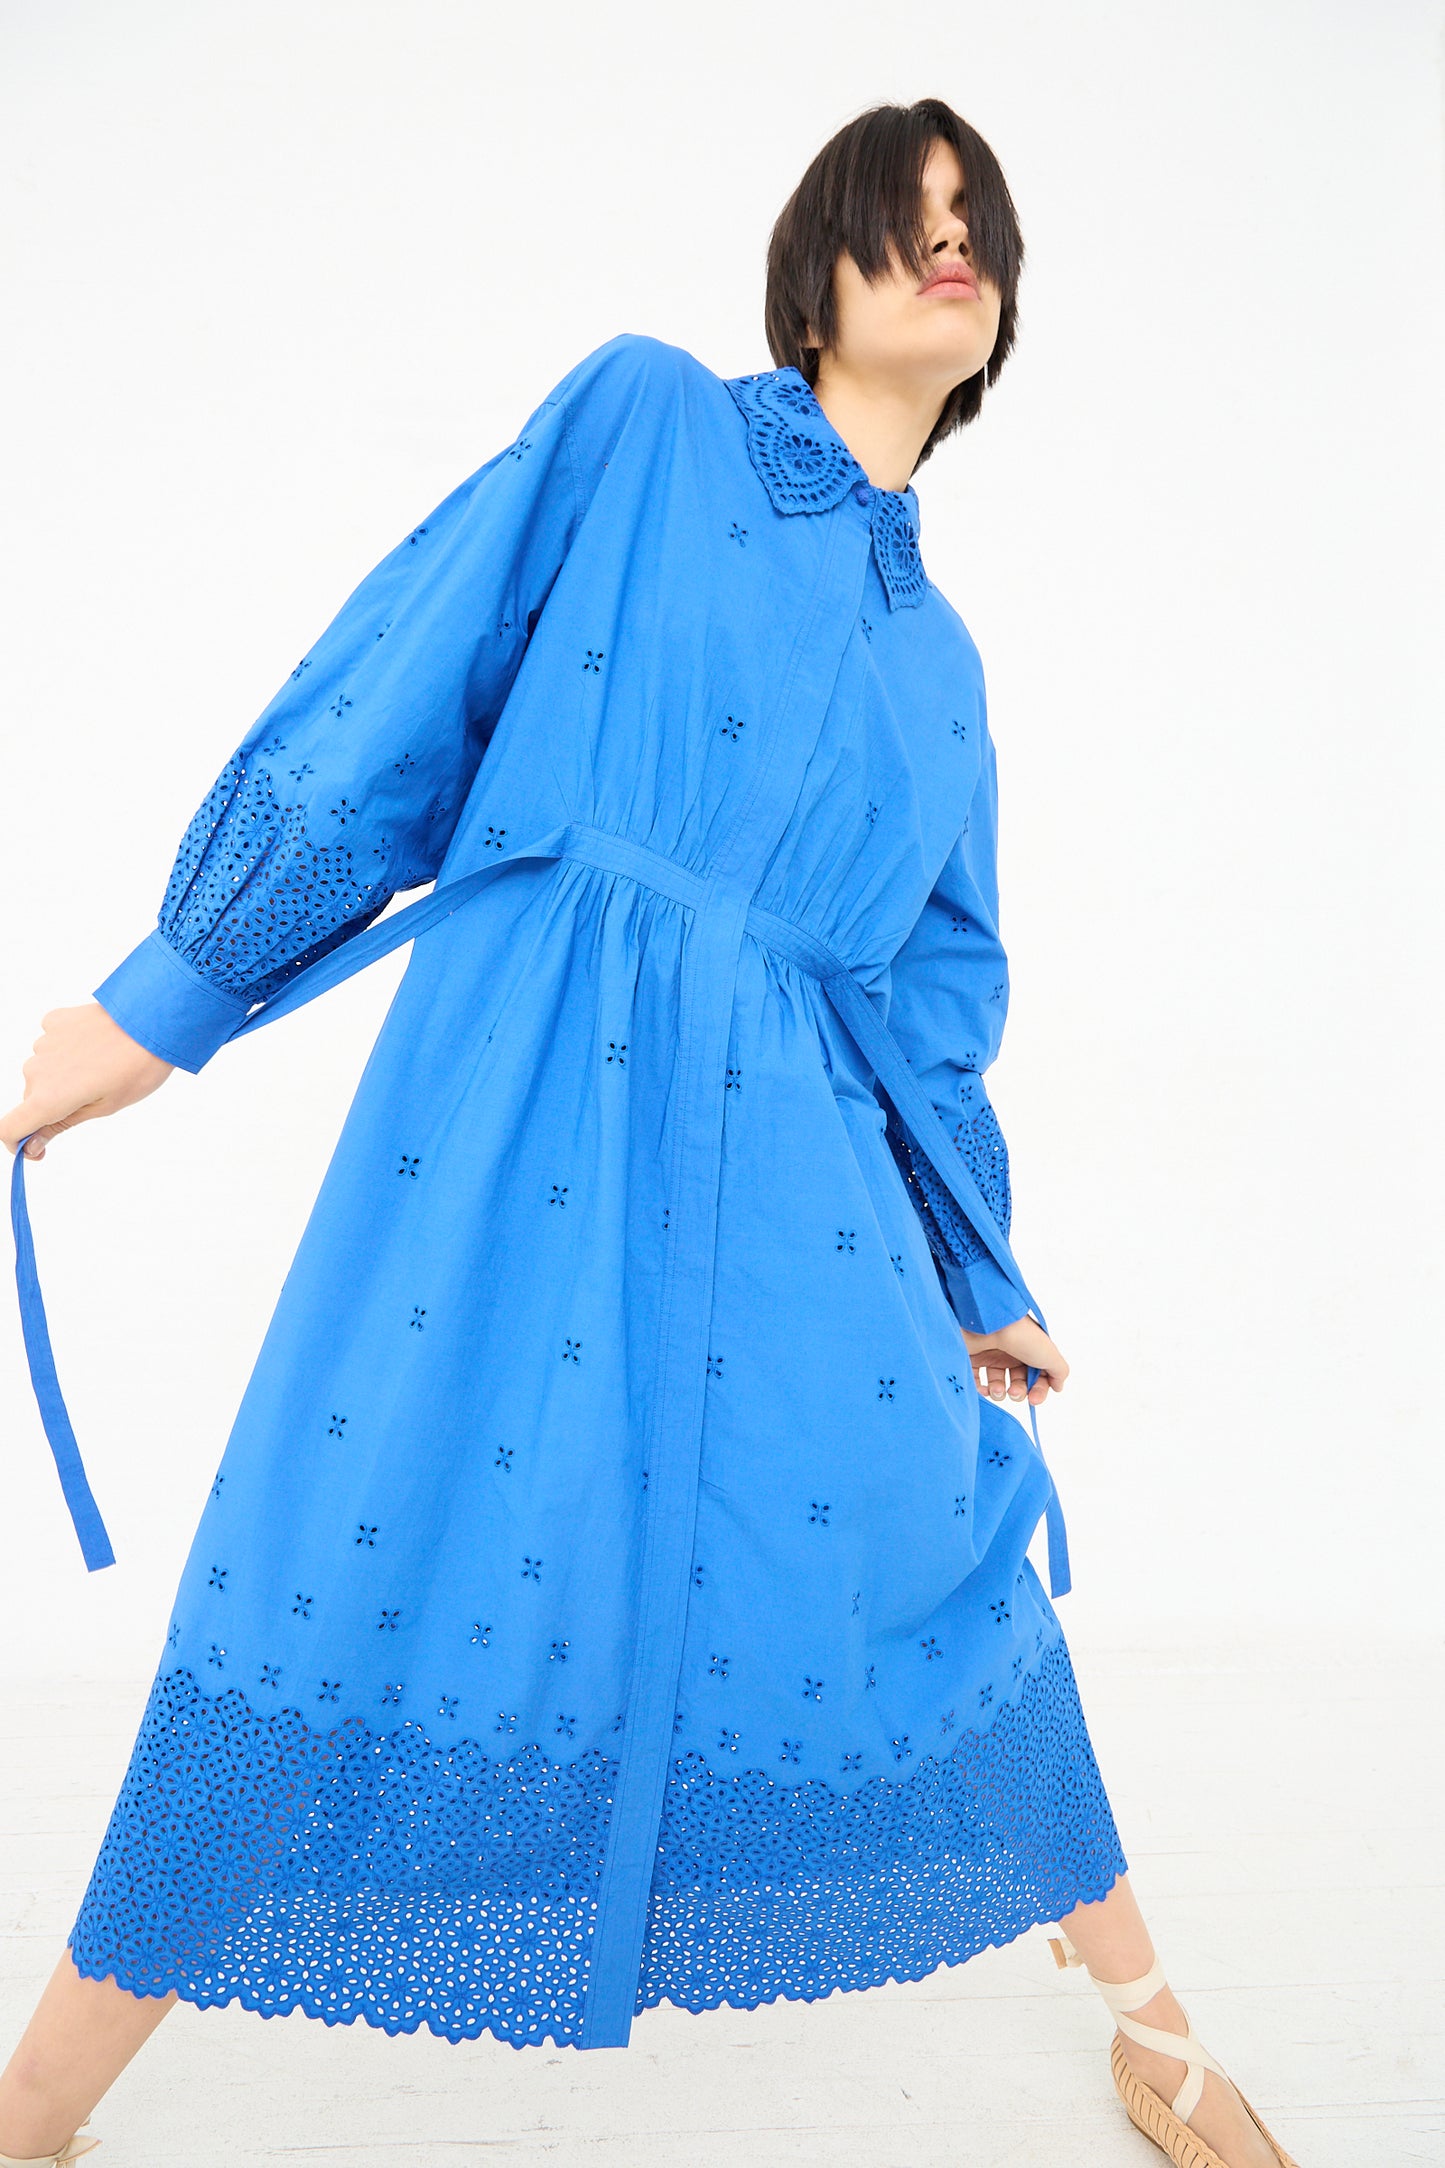 A woman in an Ulla Johnson Adette Dress in Cobalt with eyelet design details striking a dynamic pose against a white background.